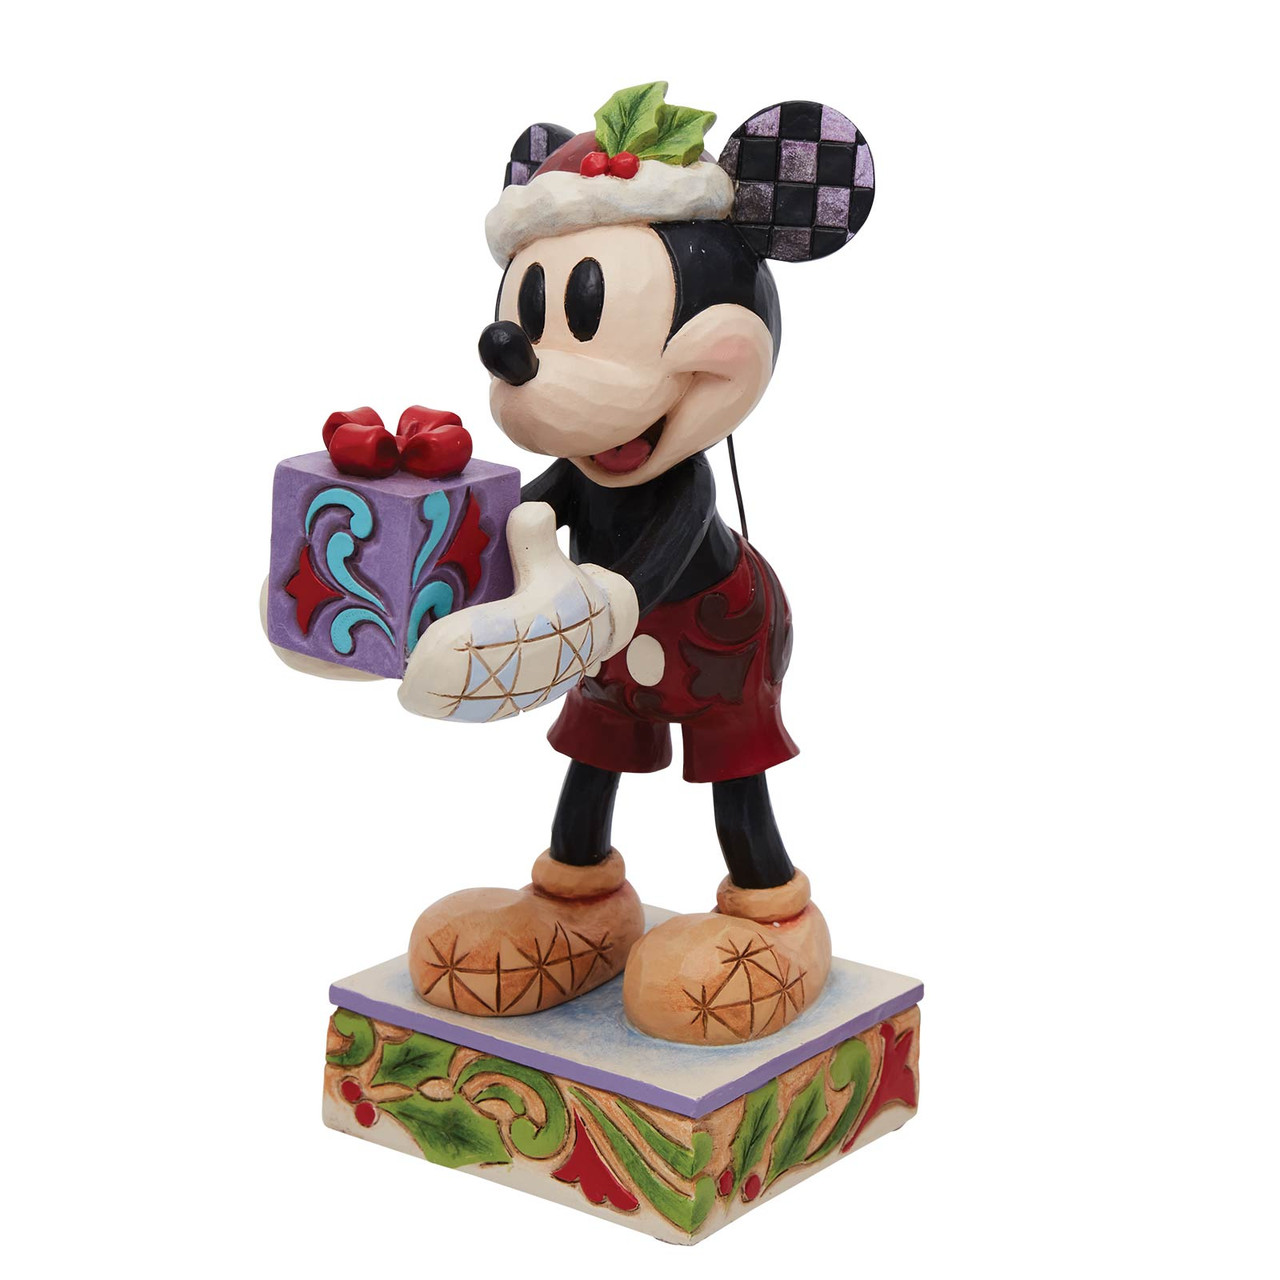 Jim Shore Disney Traditions TOUCH OF MAGIC Mickey Mouse by Enesco